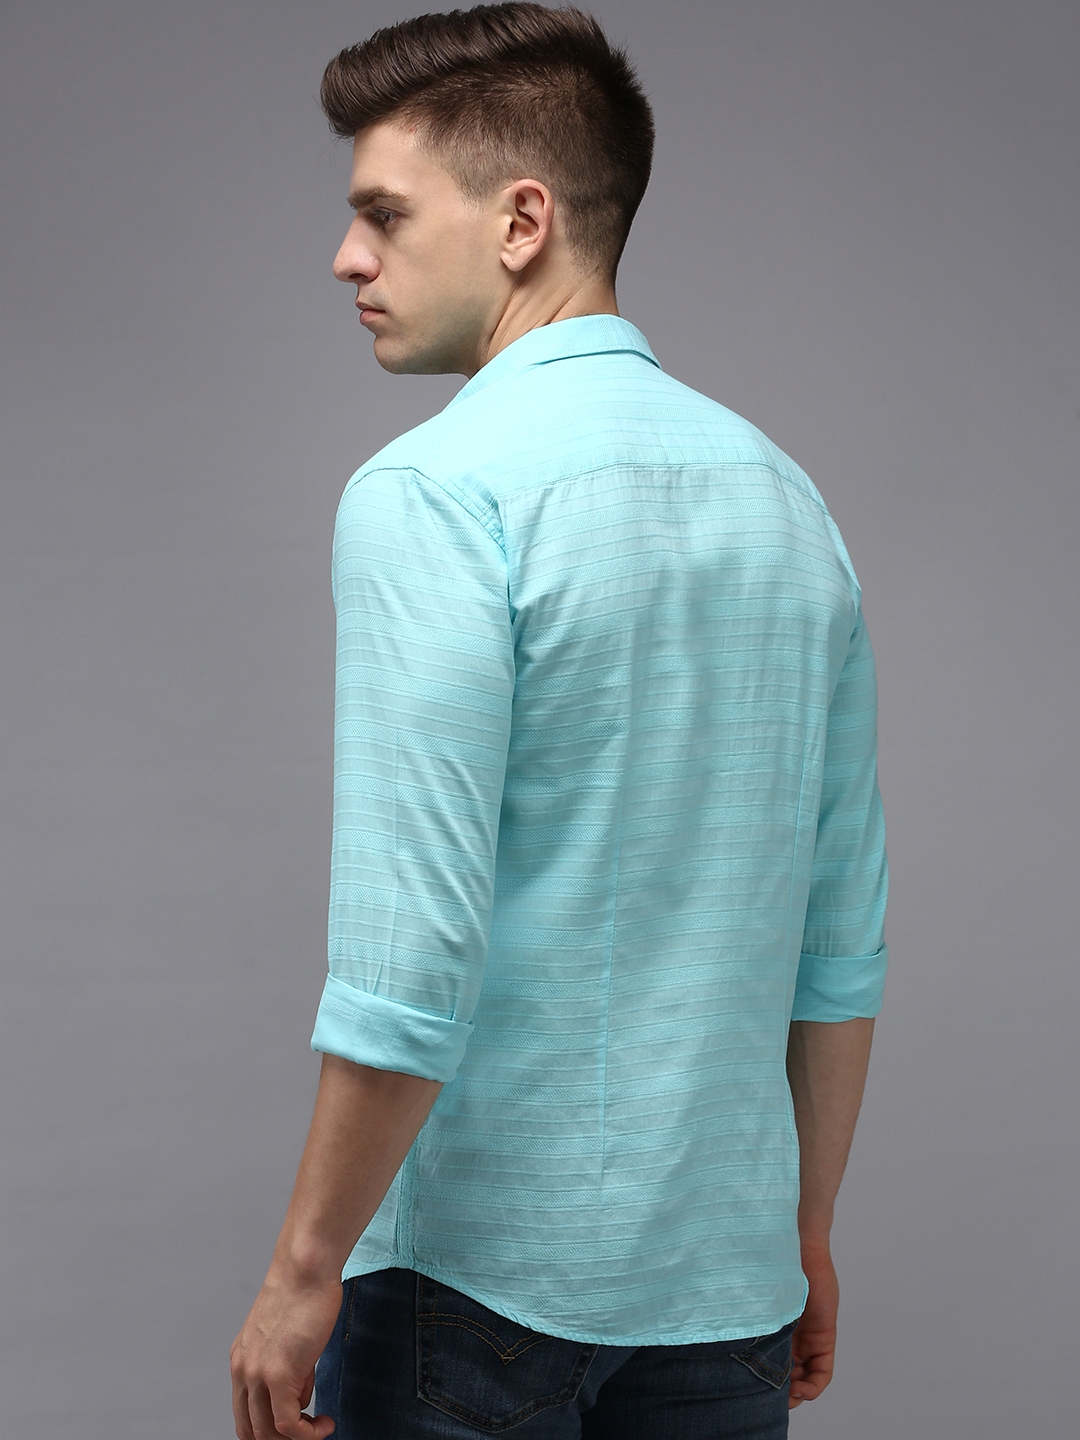 Men's Blue Cotton Solid Casual Shirts